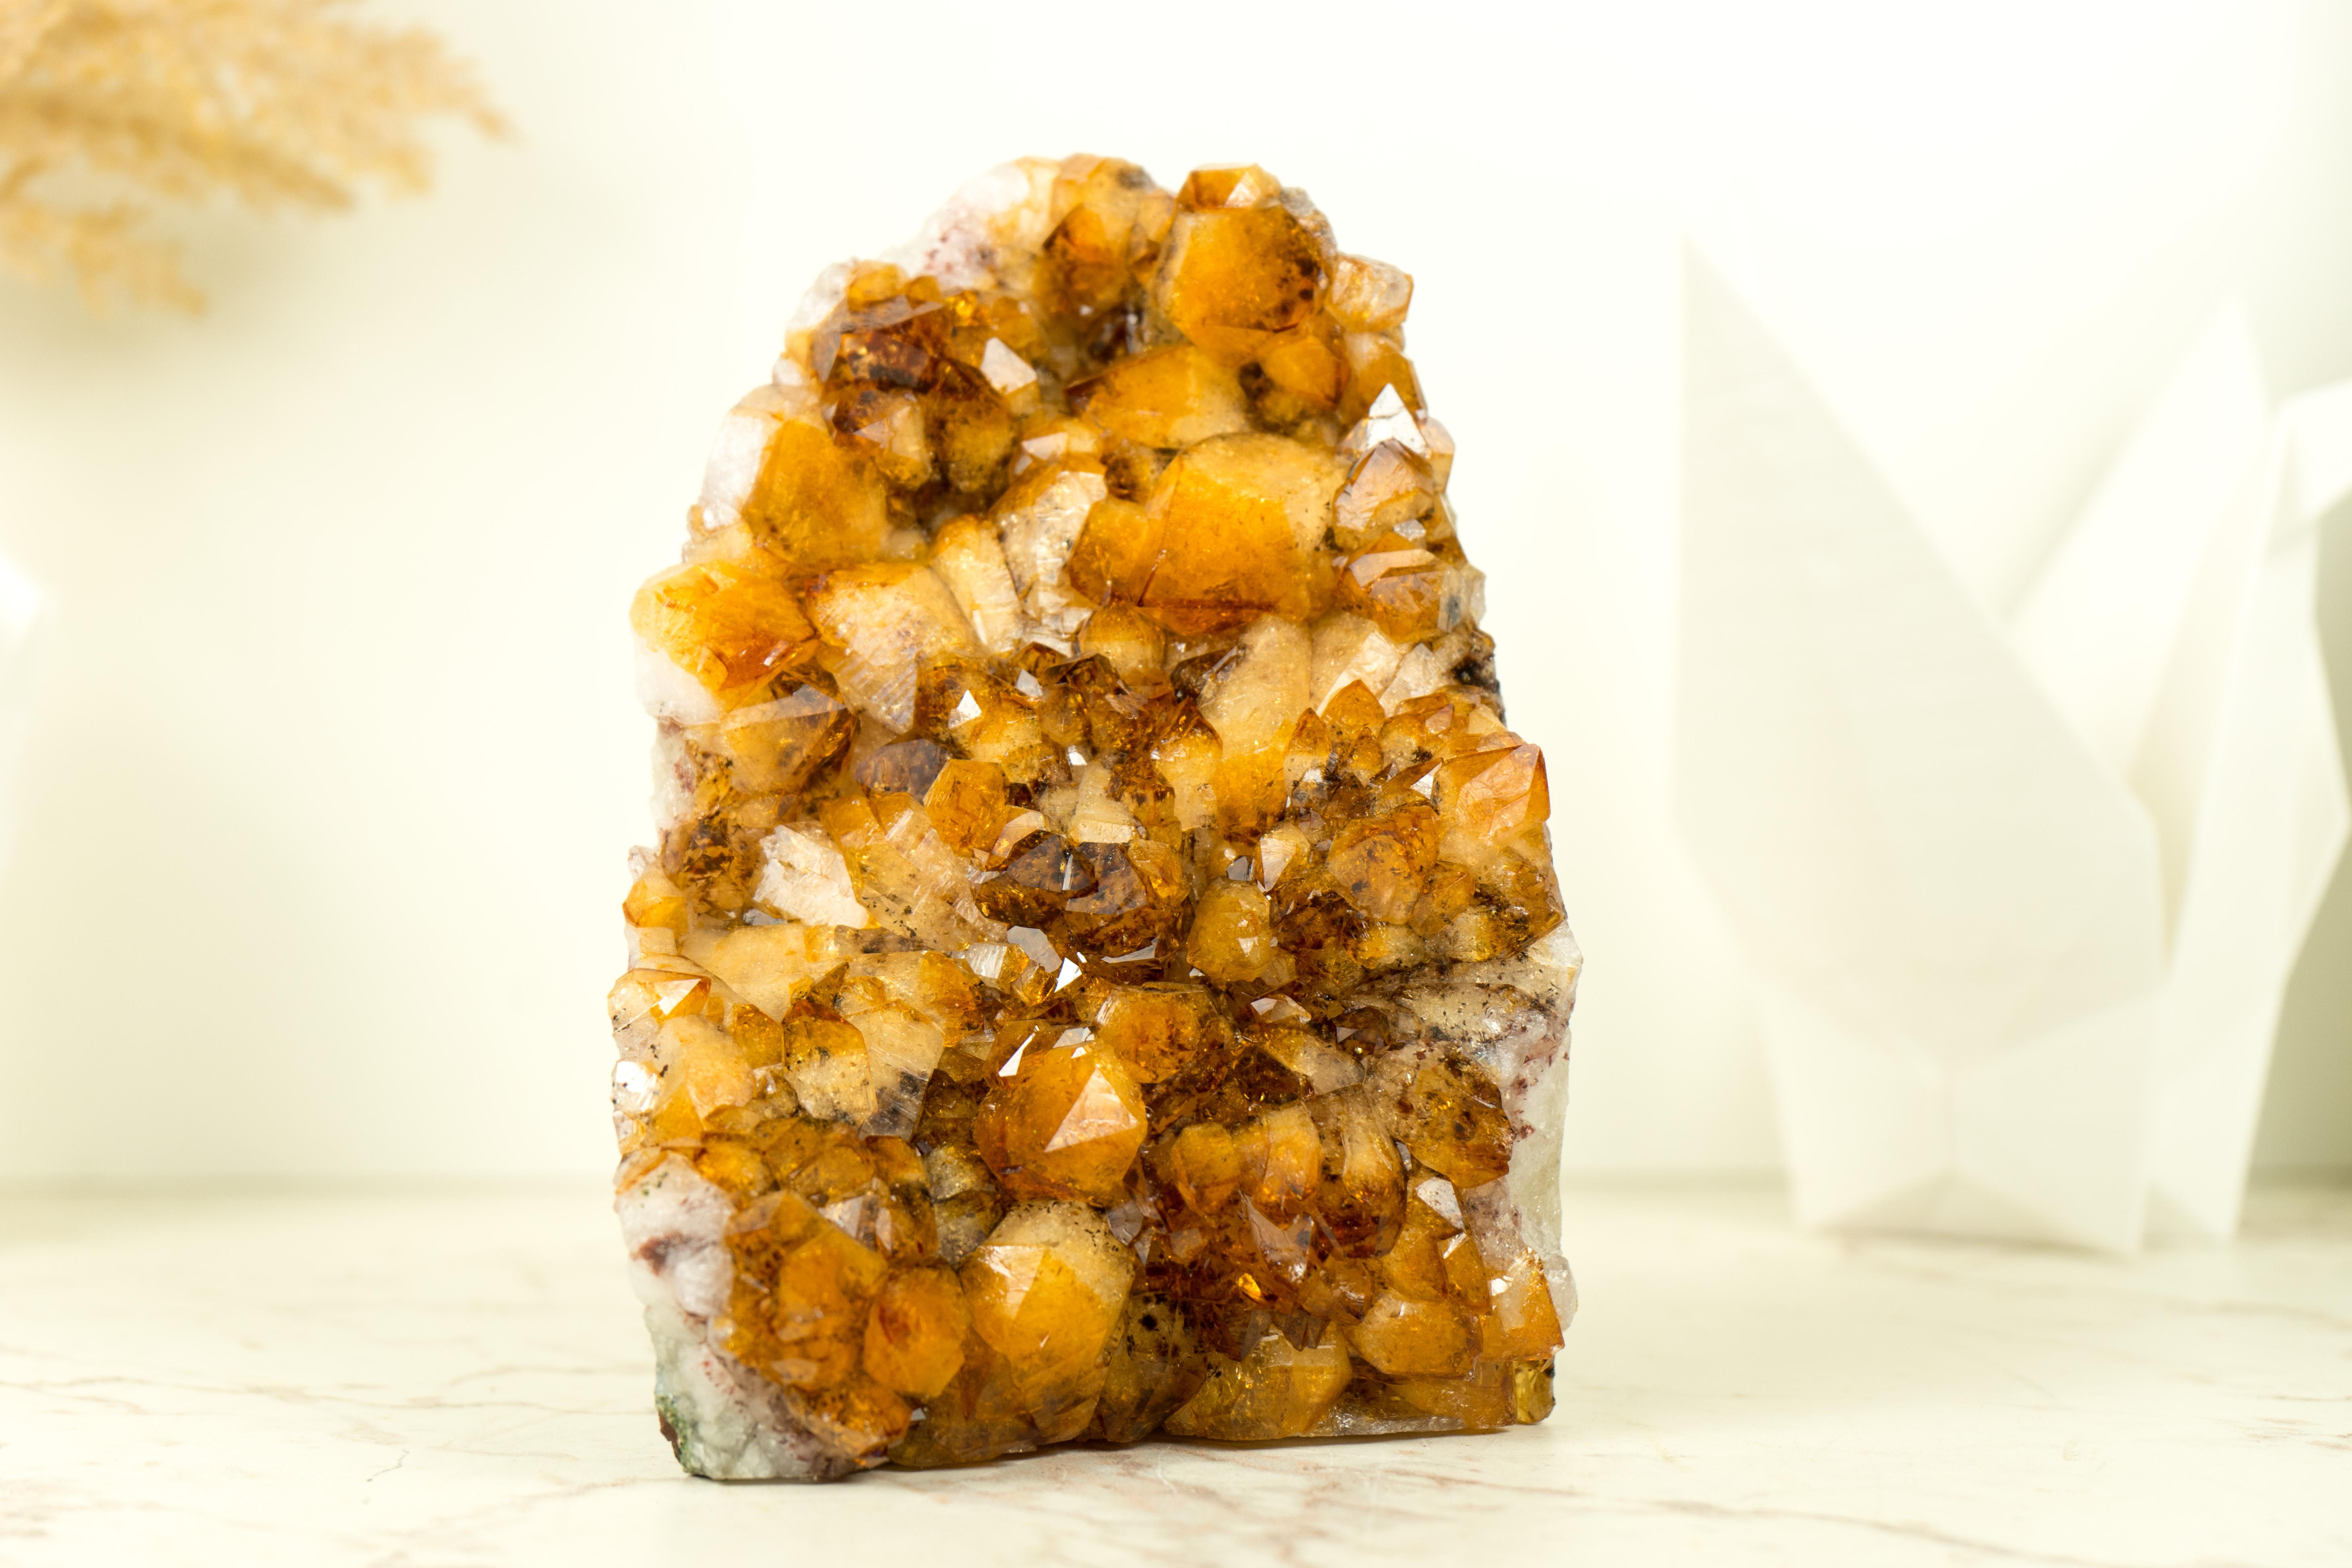 A Small & Rare Citrine Cluster that boasts world-class color tones, beautiful aesthetics, and unique characteristics. This extraordinary citrine crystal promises to be a stunning addition to your office table, home decor, or crystal collection, with